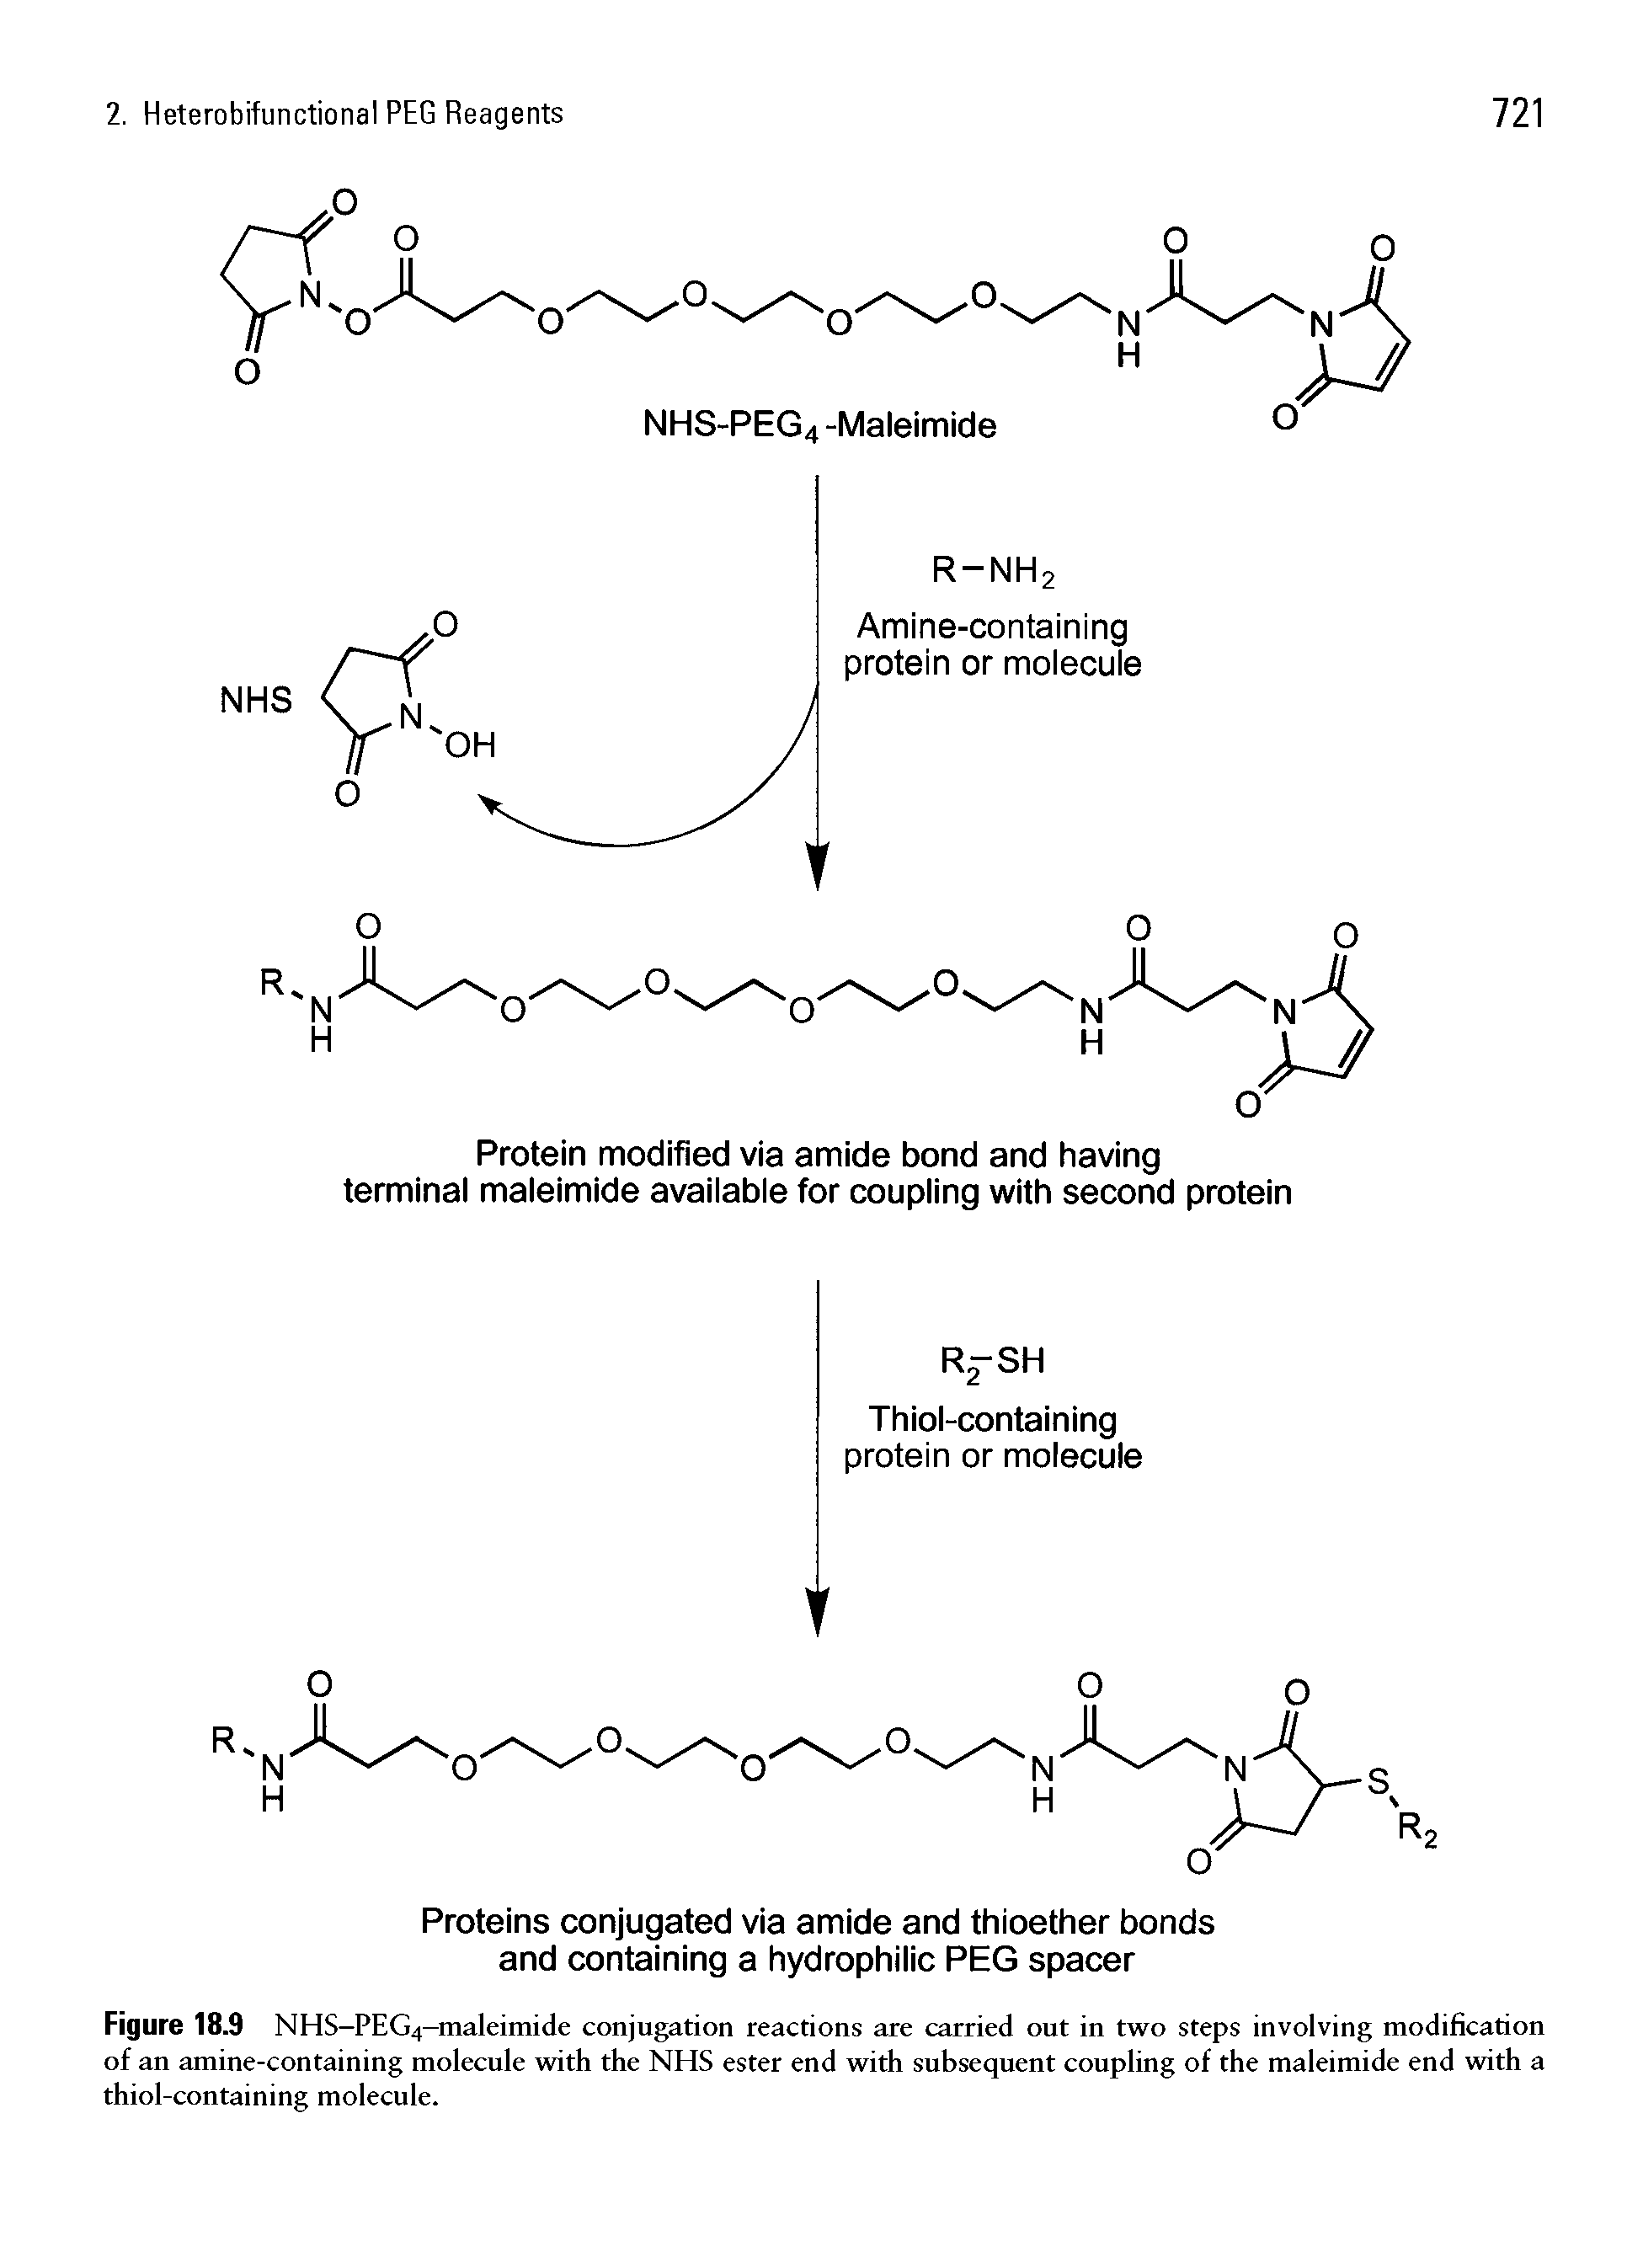 Figure 18.9 NHS-PEG4-maleimide conjugation reactions are carried out in two steps involving modification of an amine-containing molecule with the NHS ester end with subsequent coupling of the maleimide end with a thiol-containing molecule.